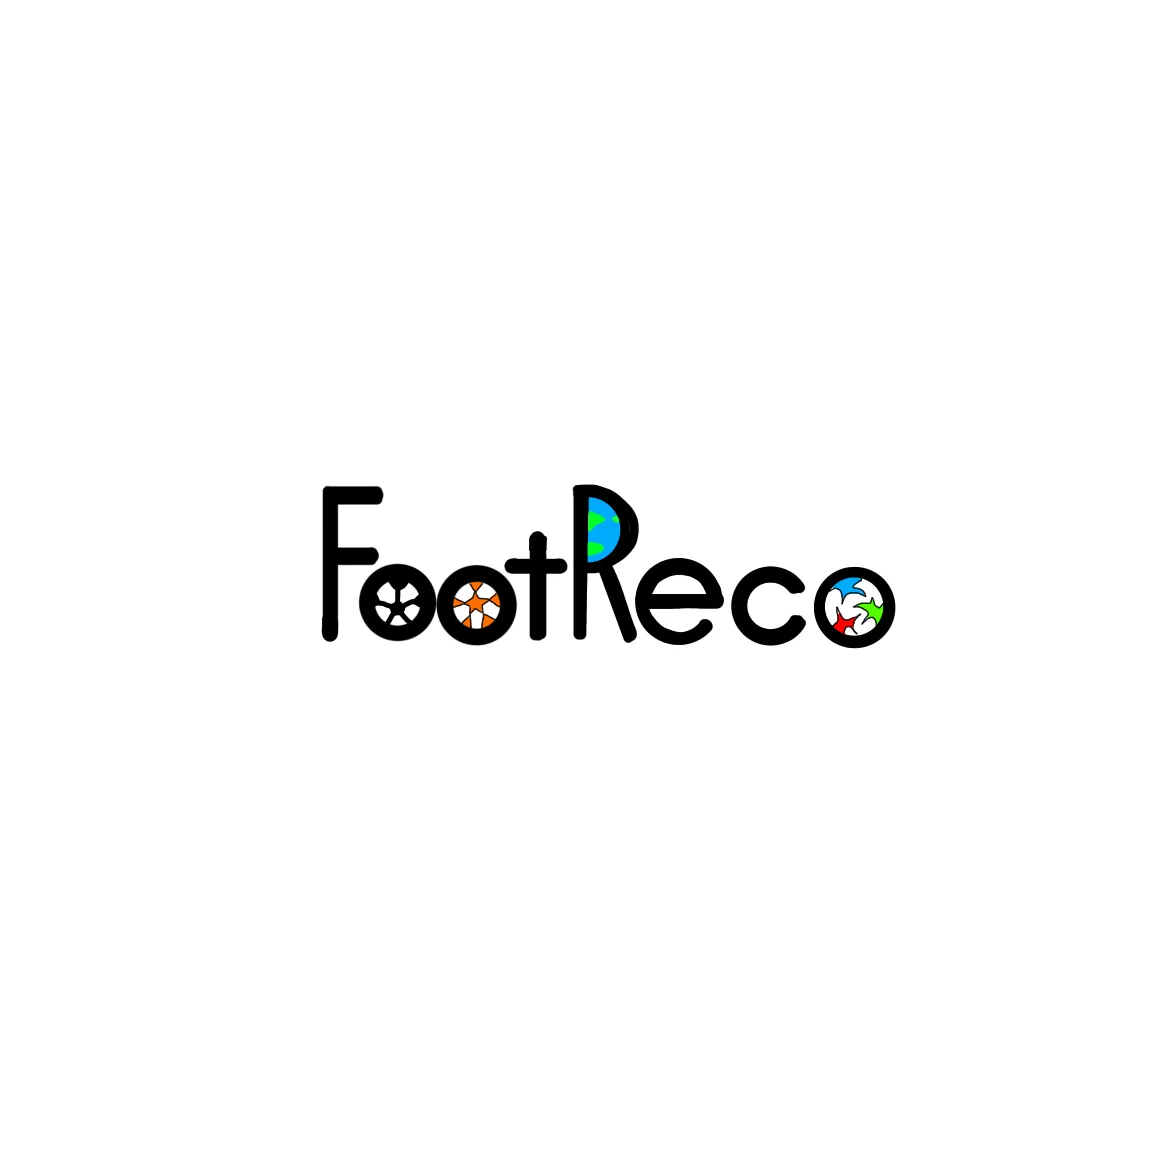 FootRecoLogoPng